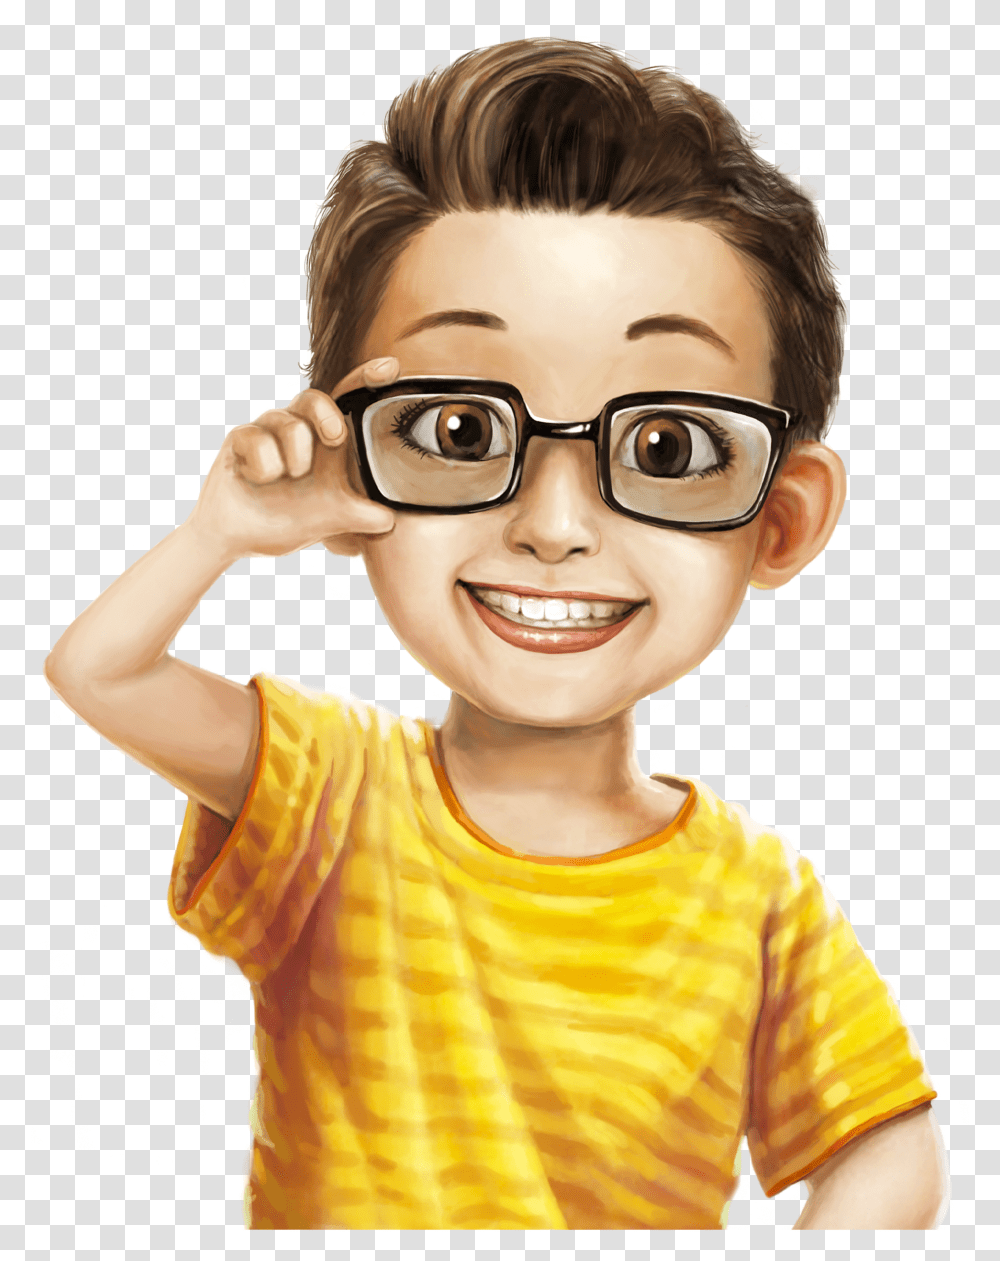 Chinese Cartoon Characters English Yue Children Clipart Chinese Boy Cartoon Character Transparent Png